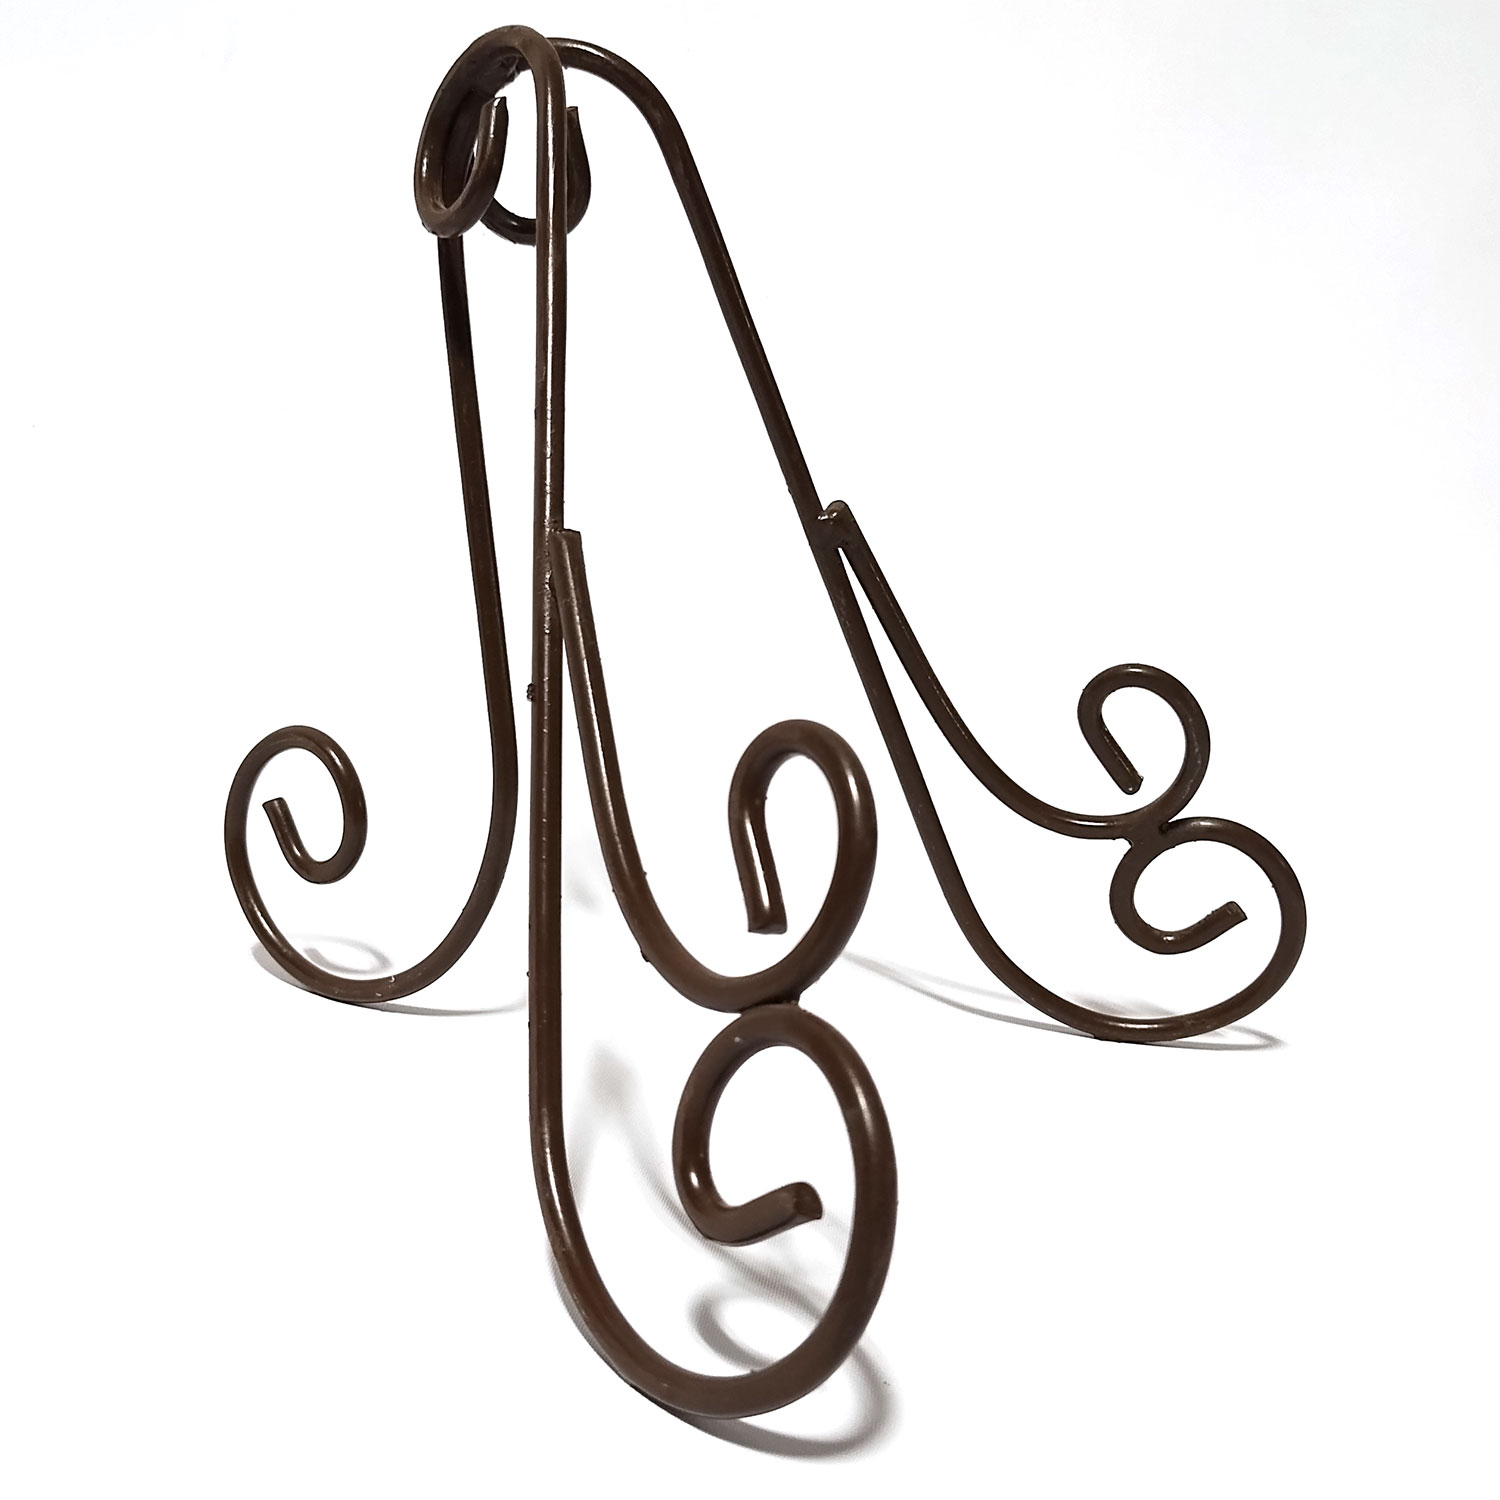 126733 - Rustic Metal Scroll Design - Large Plate Stand - 8in H x 9in W x 9in D